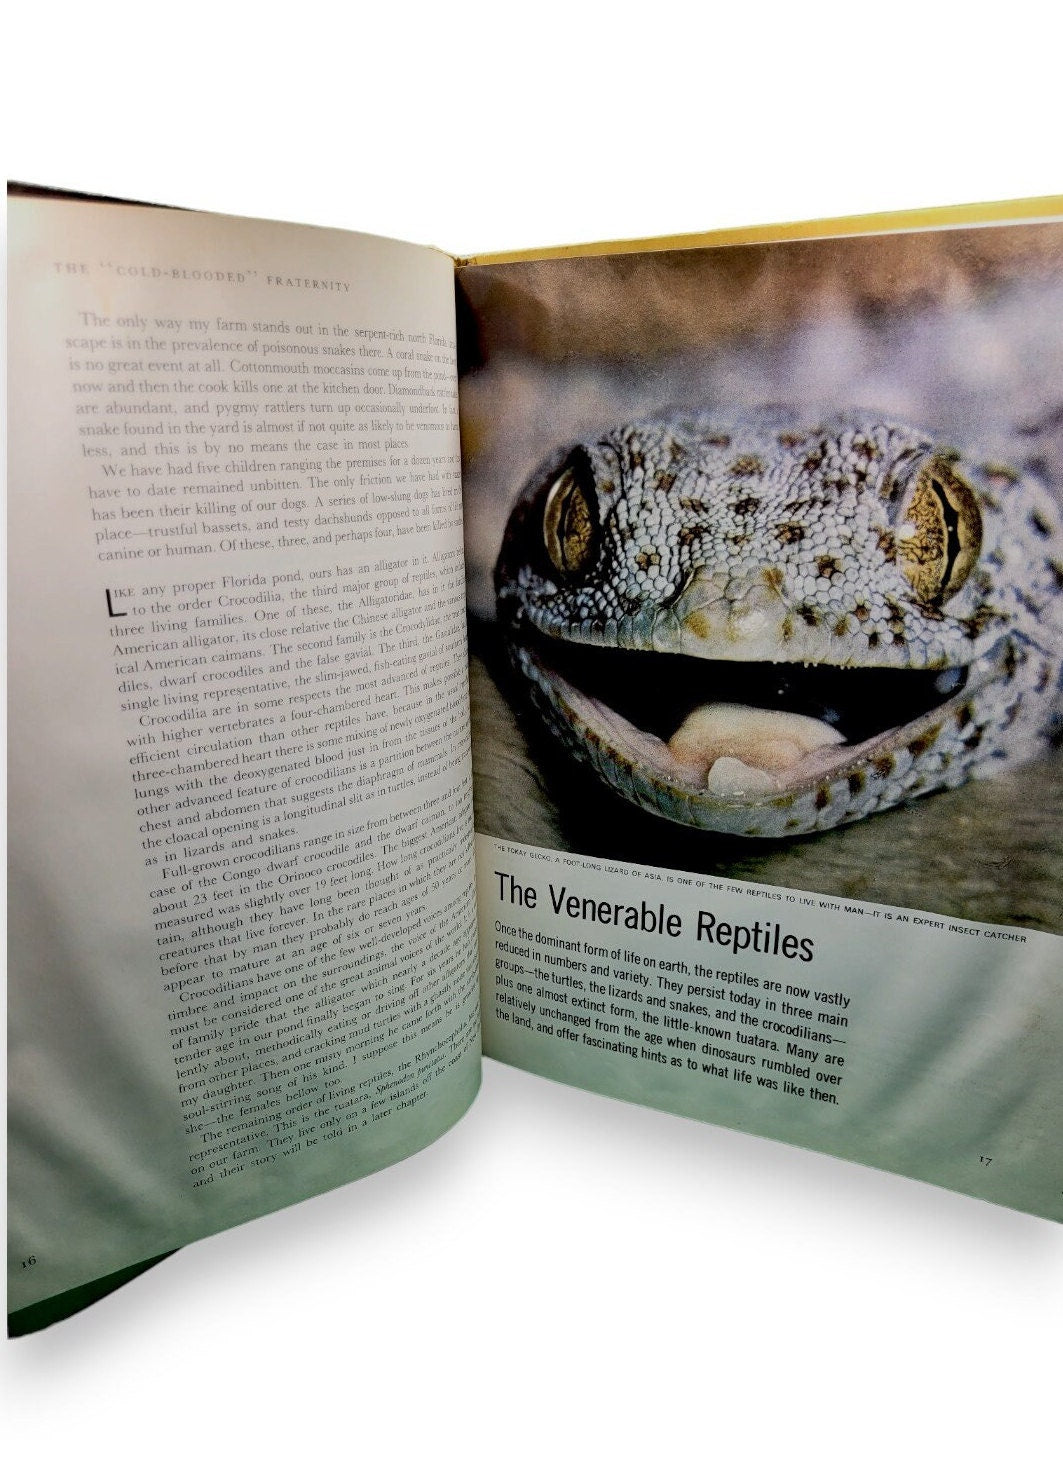 The Reptiles by Archie Carr (LIFE Nature Library) 1963